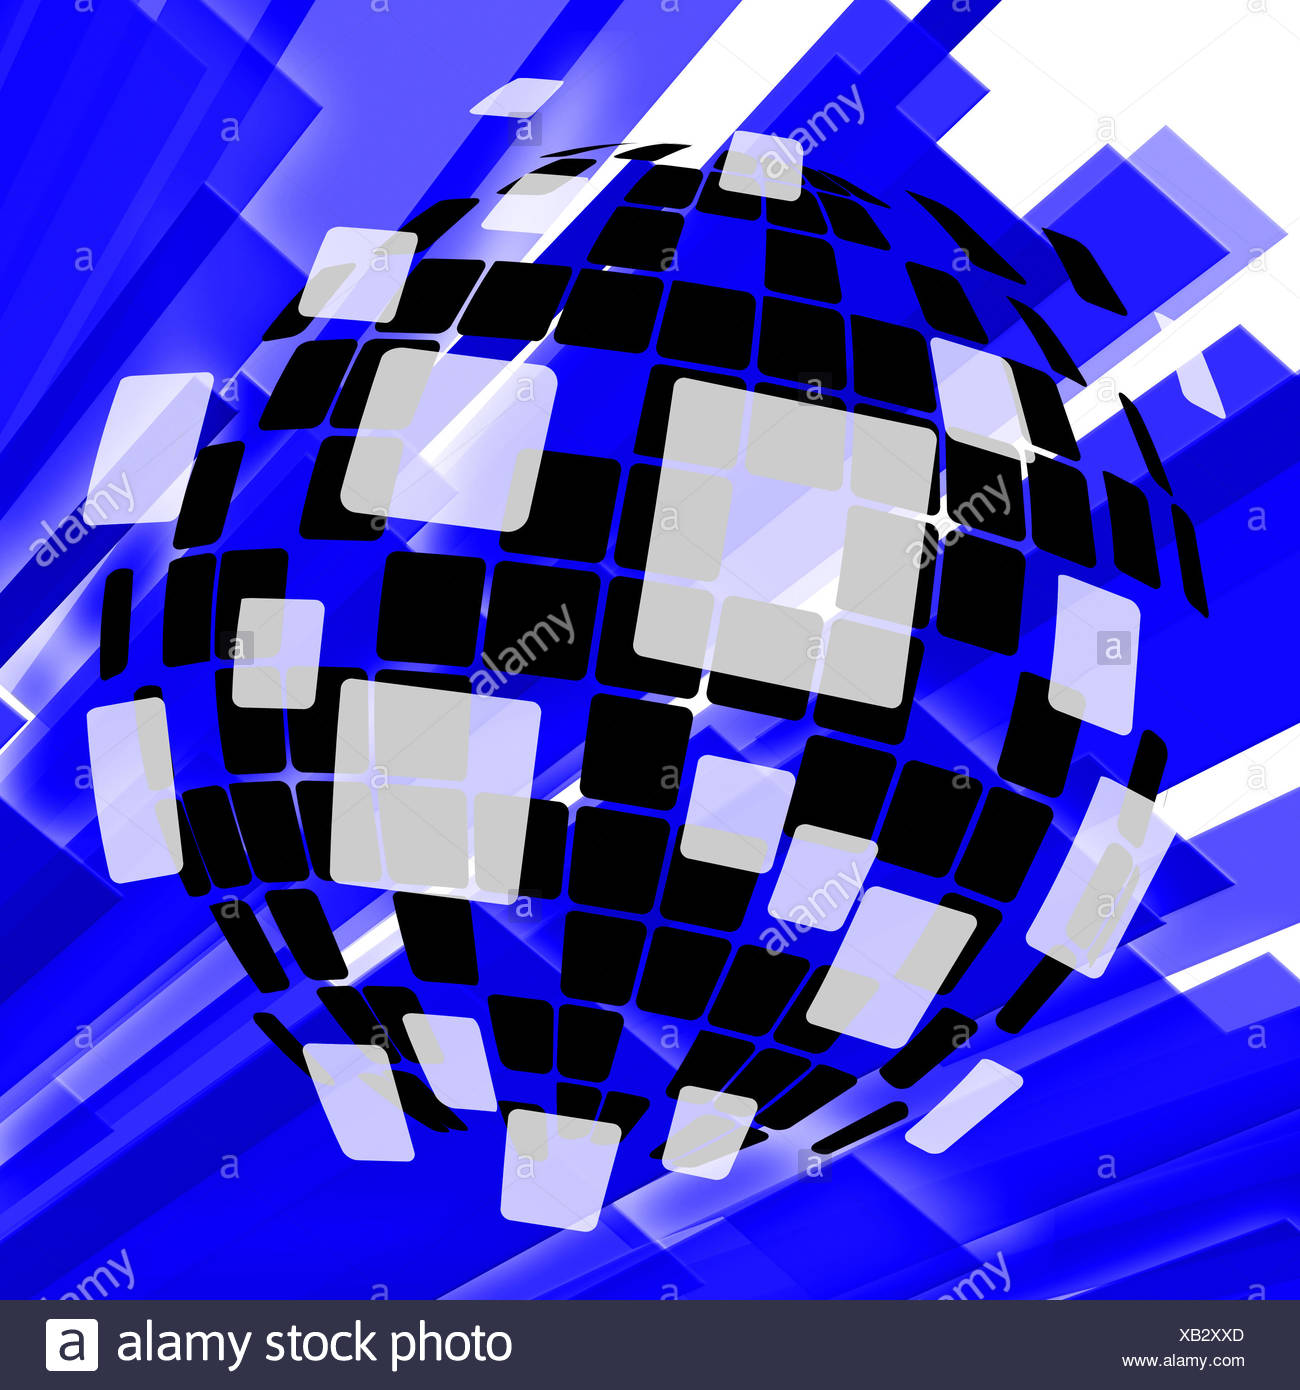 Modern Disco Ball Background Means Vintage Wallpaper Or Digital Stock Photo Alamy